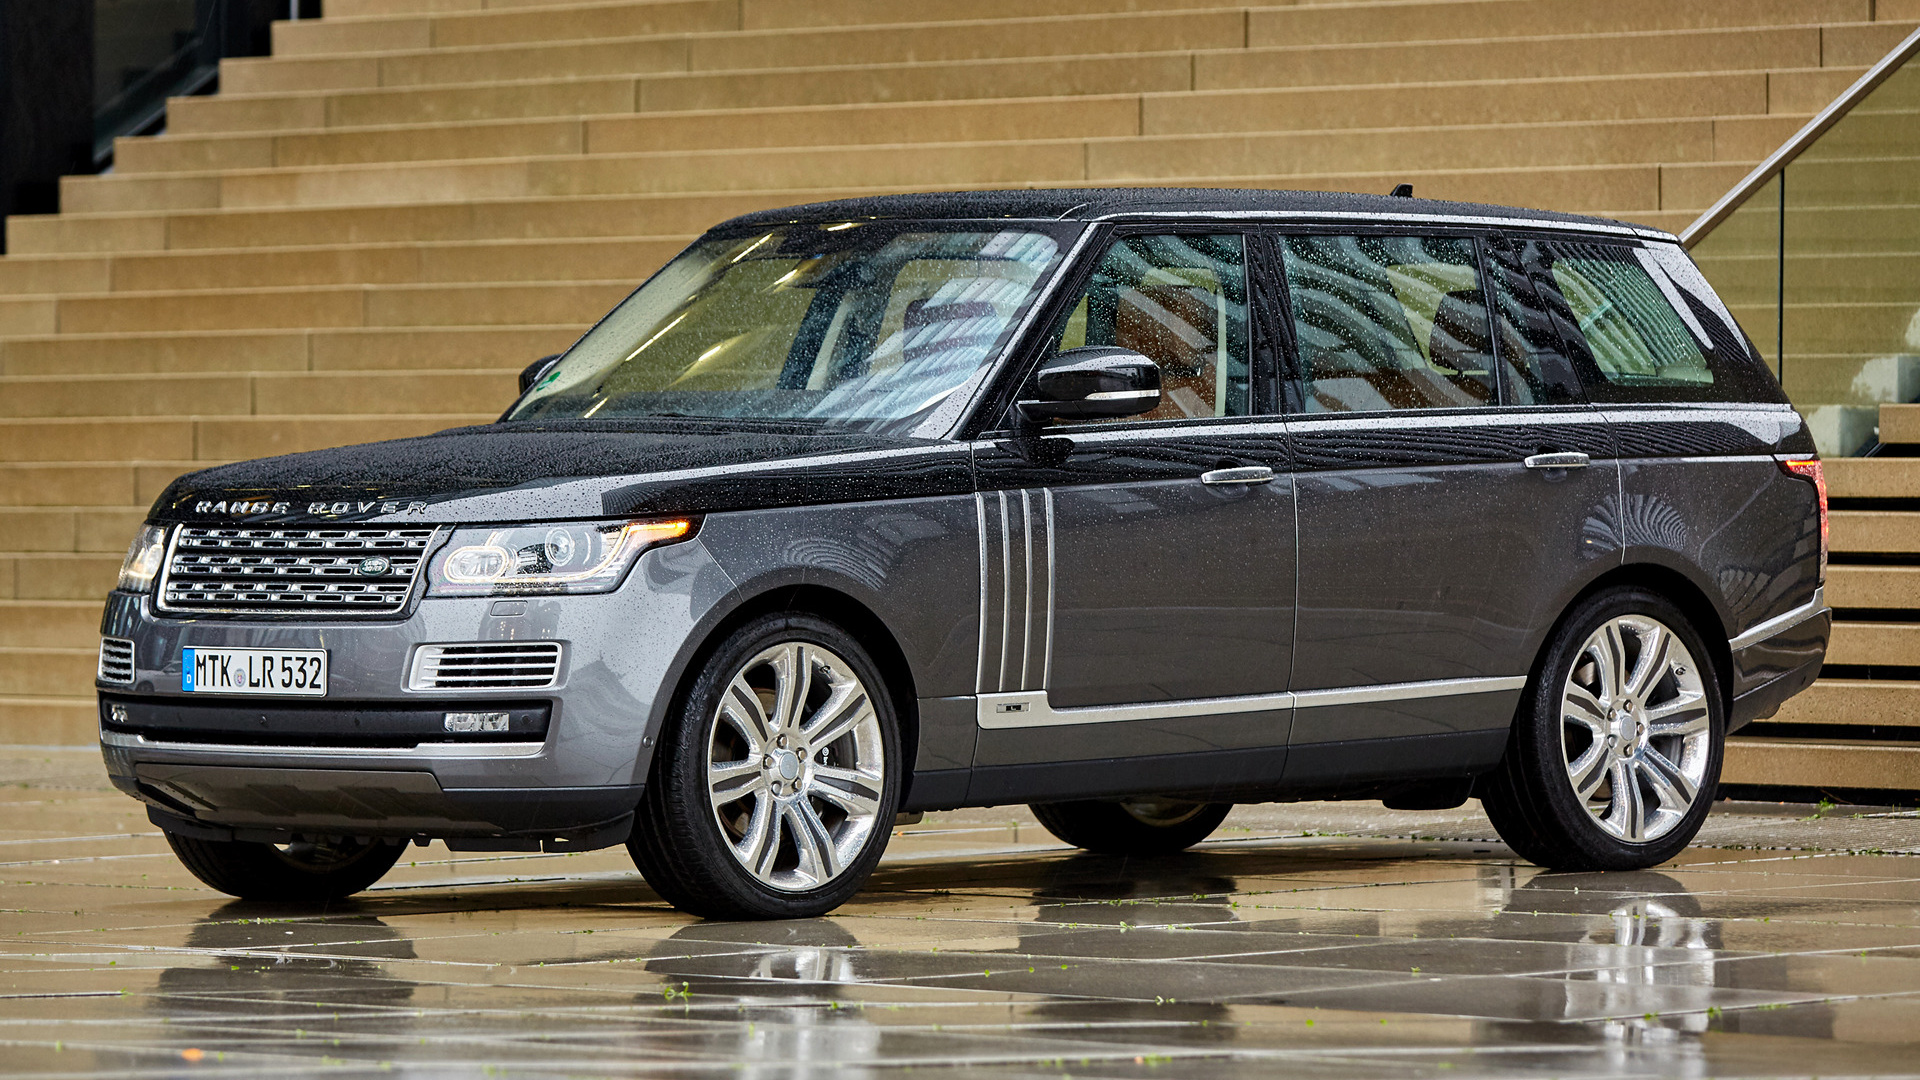 2015 Range Rover SVAutobiography [LWB] - Wallpapers and HD Images | Car ...